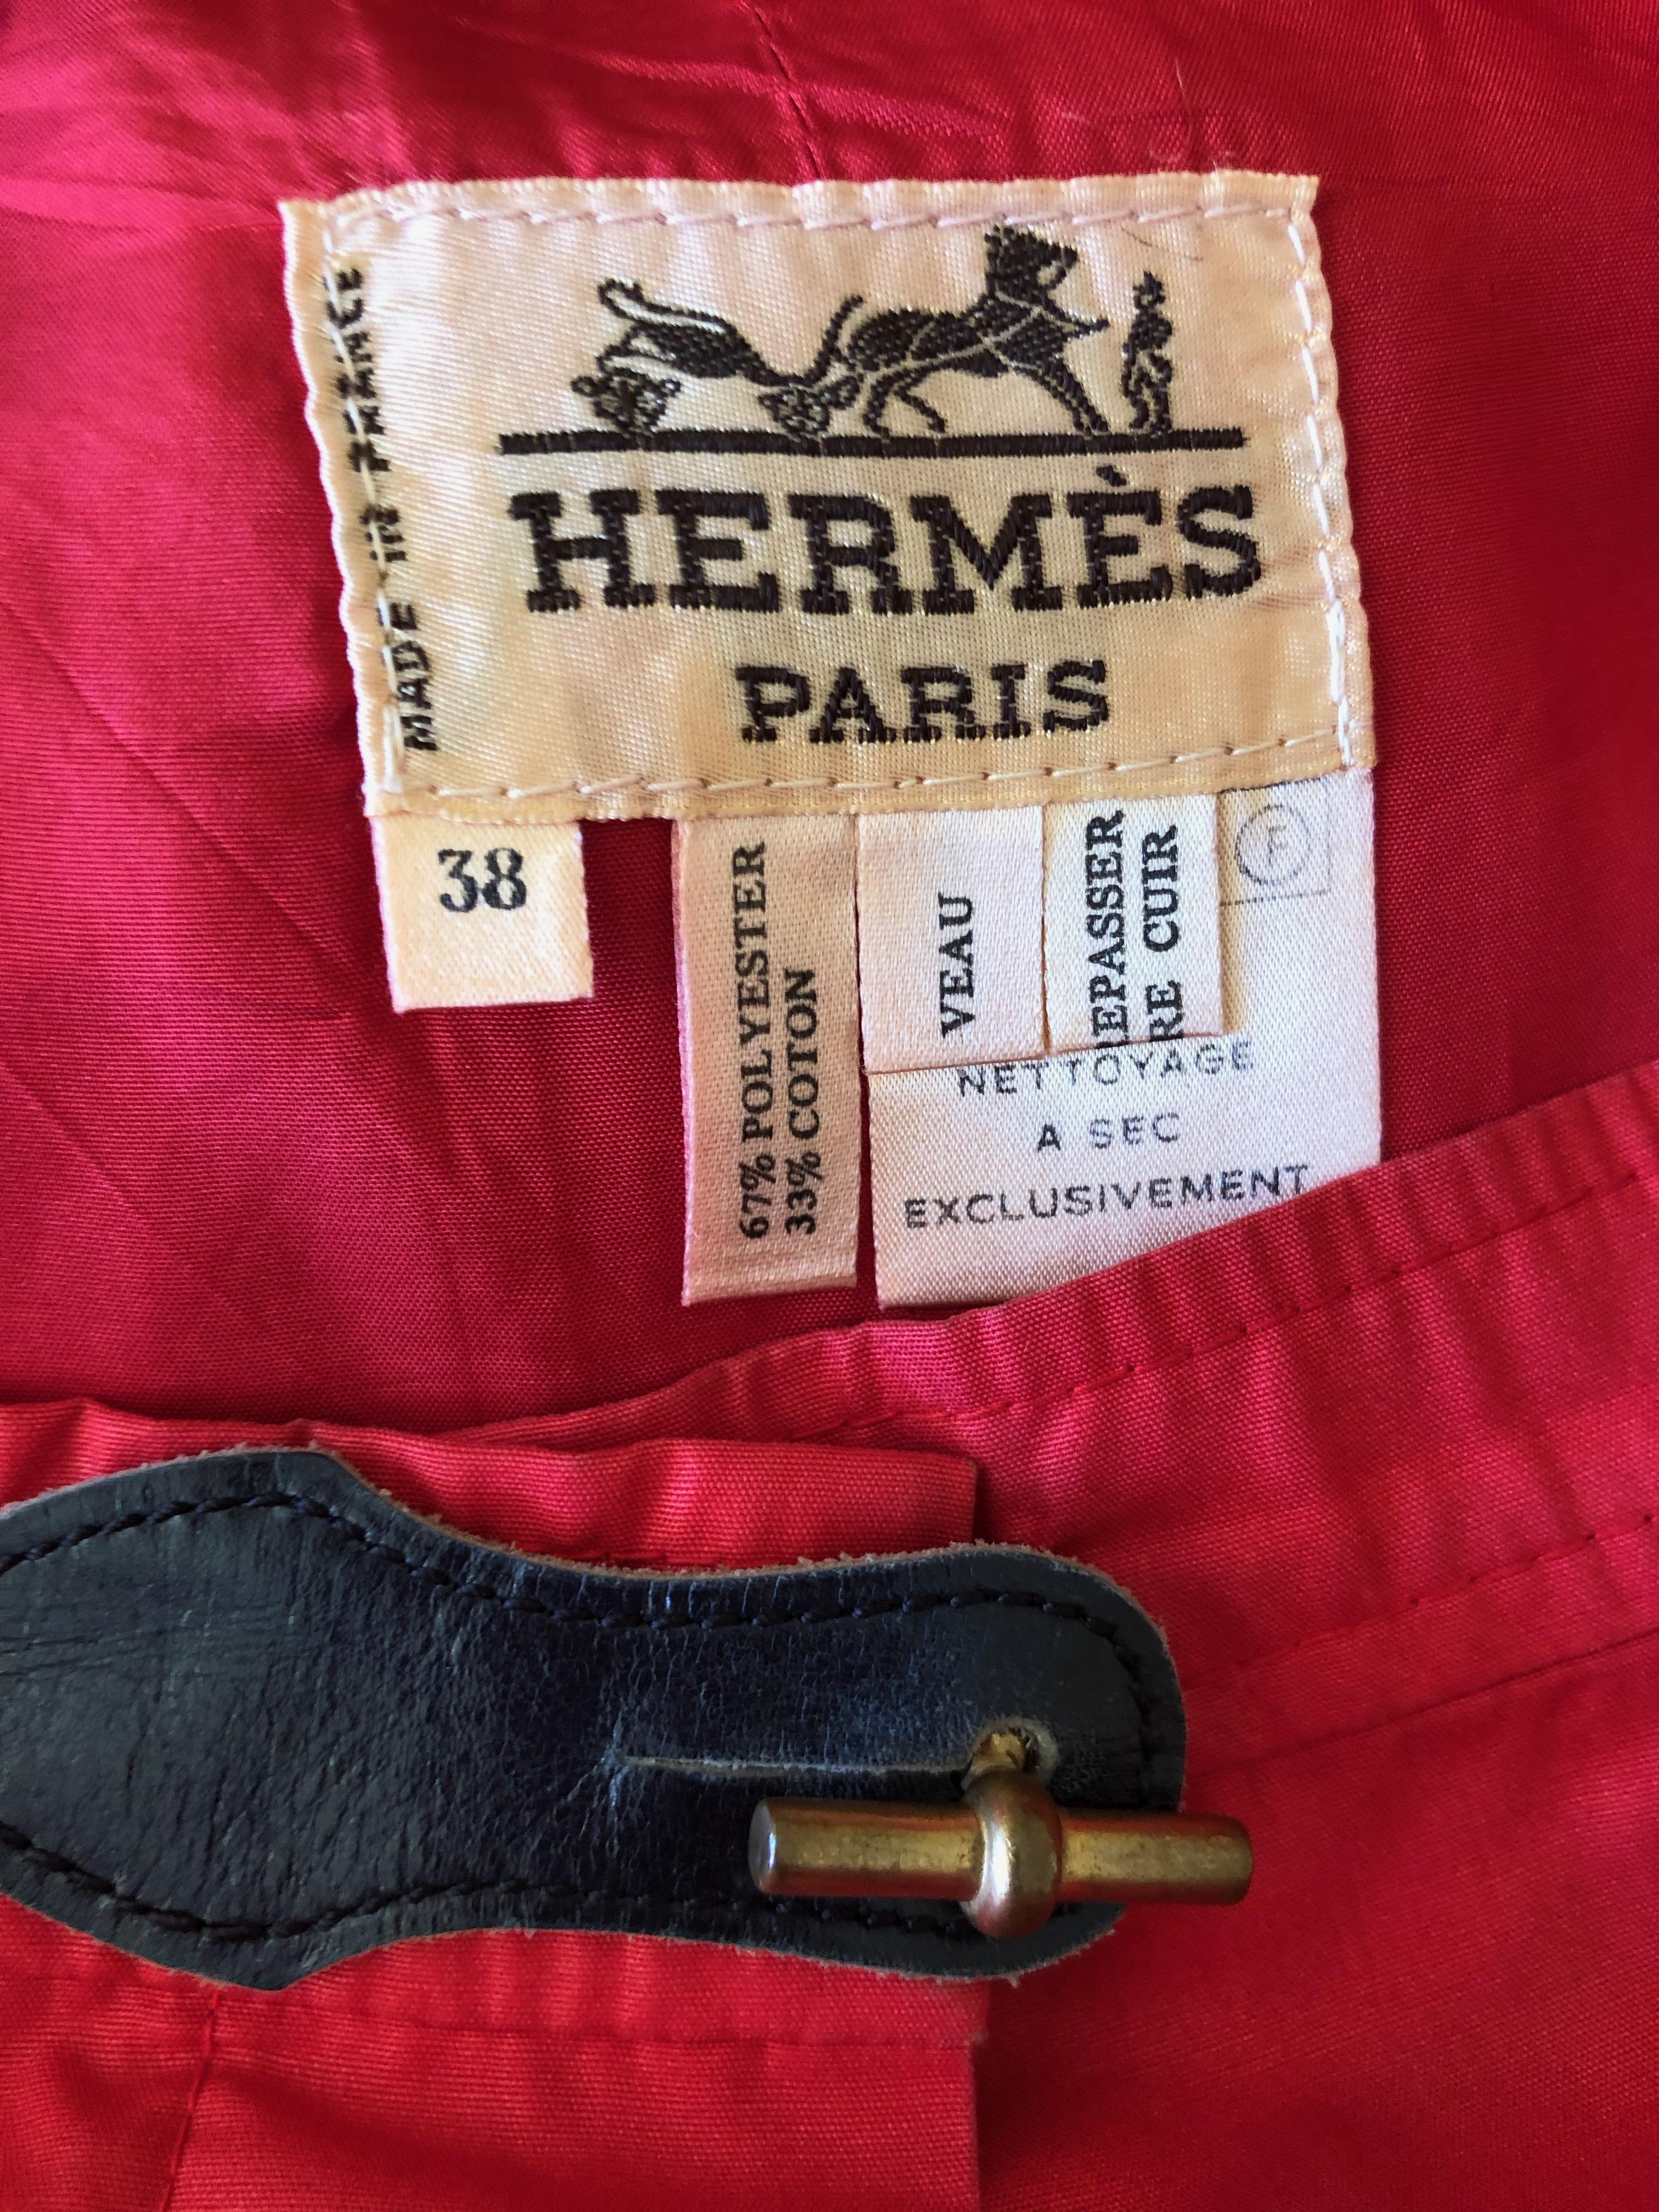 Hermes Paris Vintage Red Polished Cotton Skirt Suit with Signature Details
Skirt with jacket, the skirt has leather details at waist and the jacket features Hermes signature link as buttons..
This is so beautifully made,  such attention to detail is